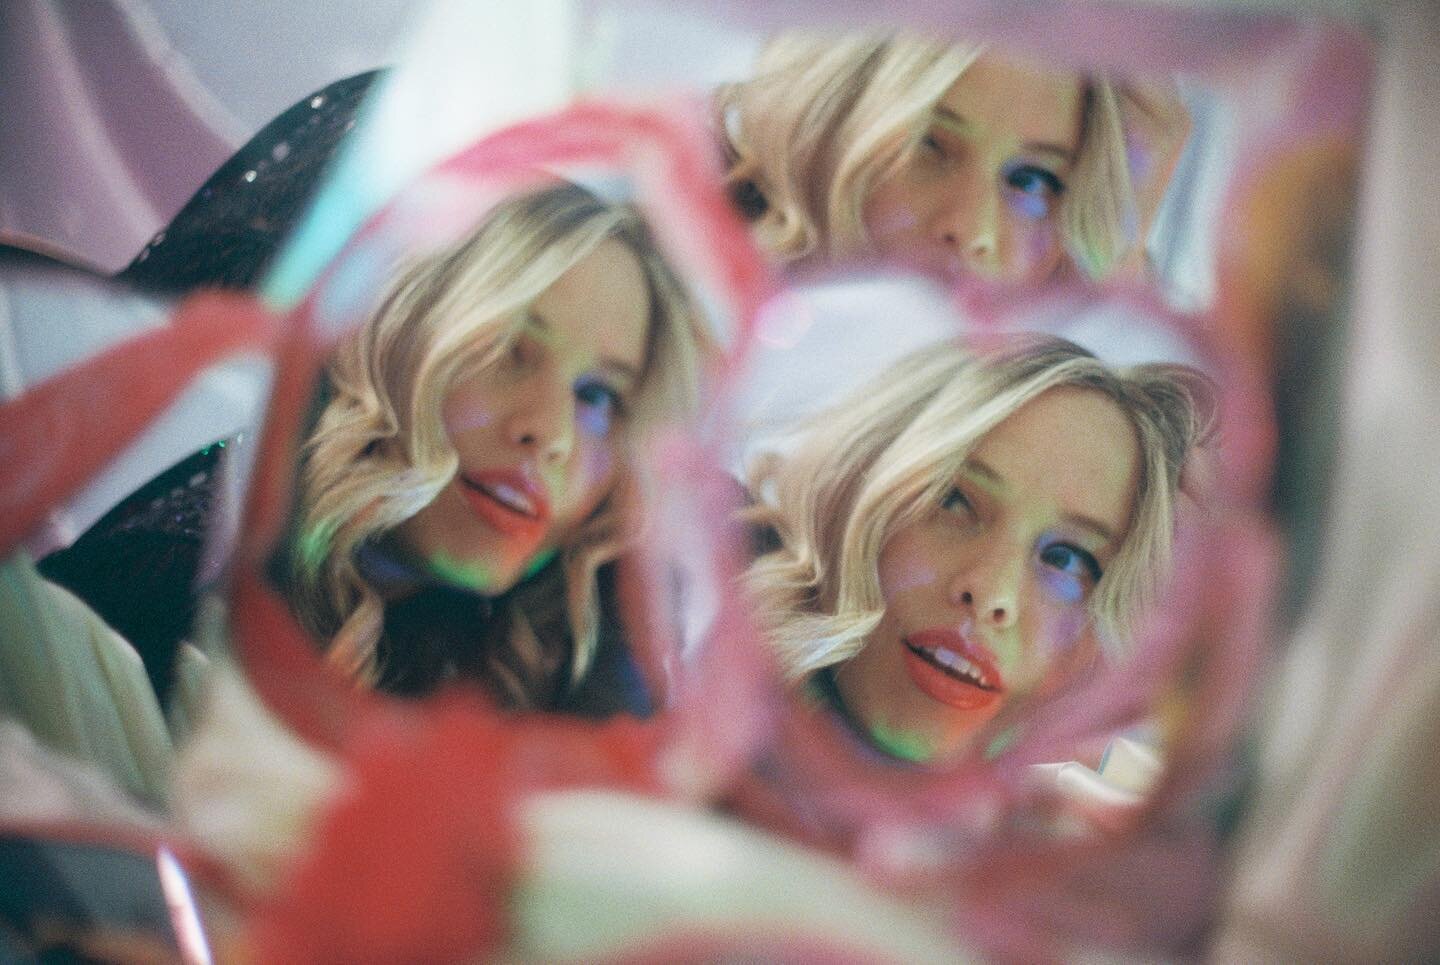 will you be my valentine? 💕👄

🍬 &hearts;️ 🍬 

🎞 by @flowerhitsthebigtime 
#filmisnotdead #filmshoot #impromptuphotoshoot #valentines #mirrormirror #loveyou #loveyourself